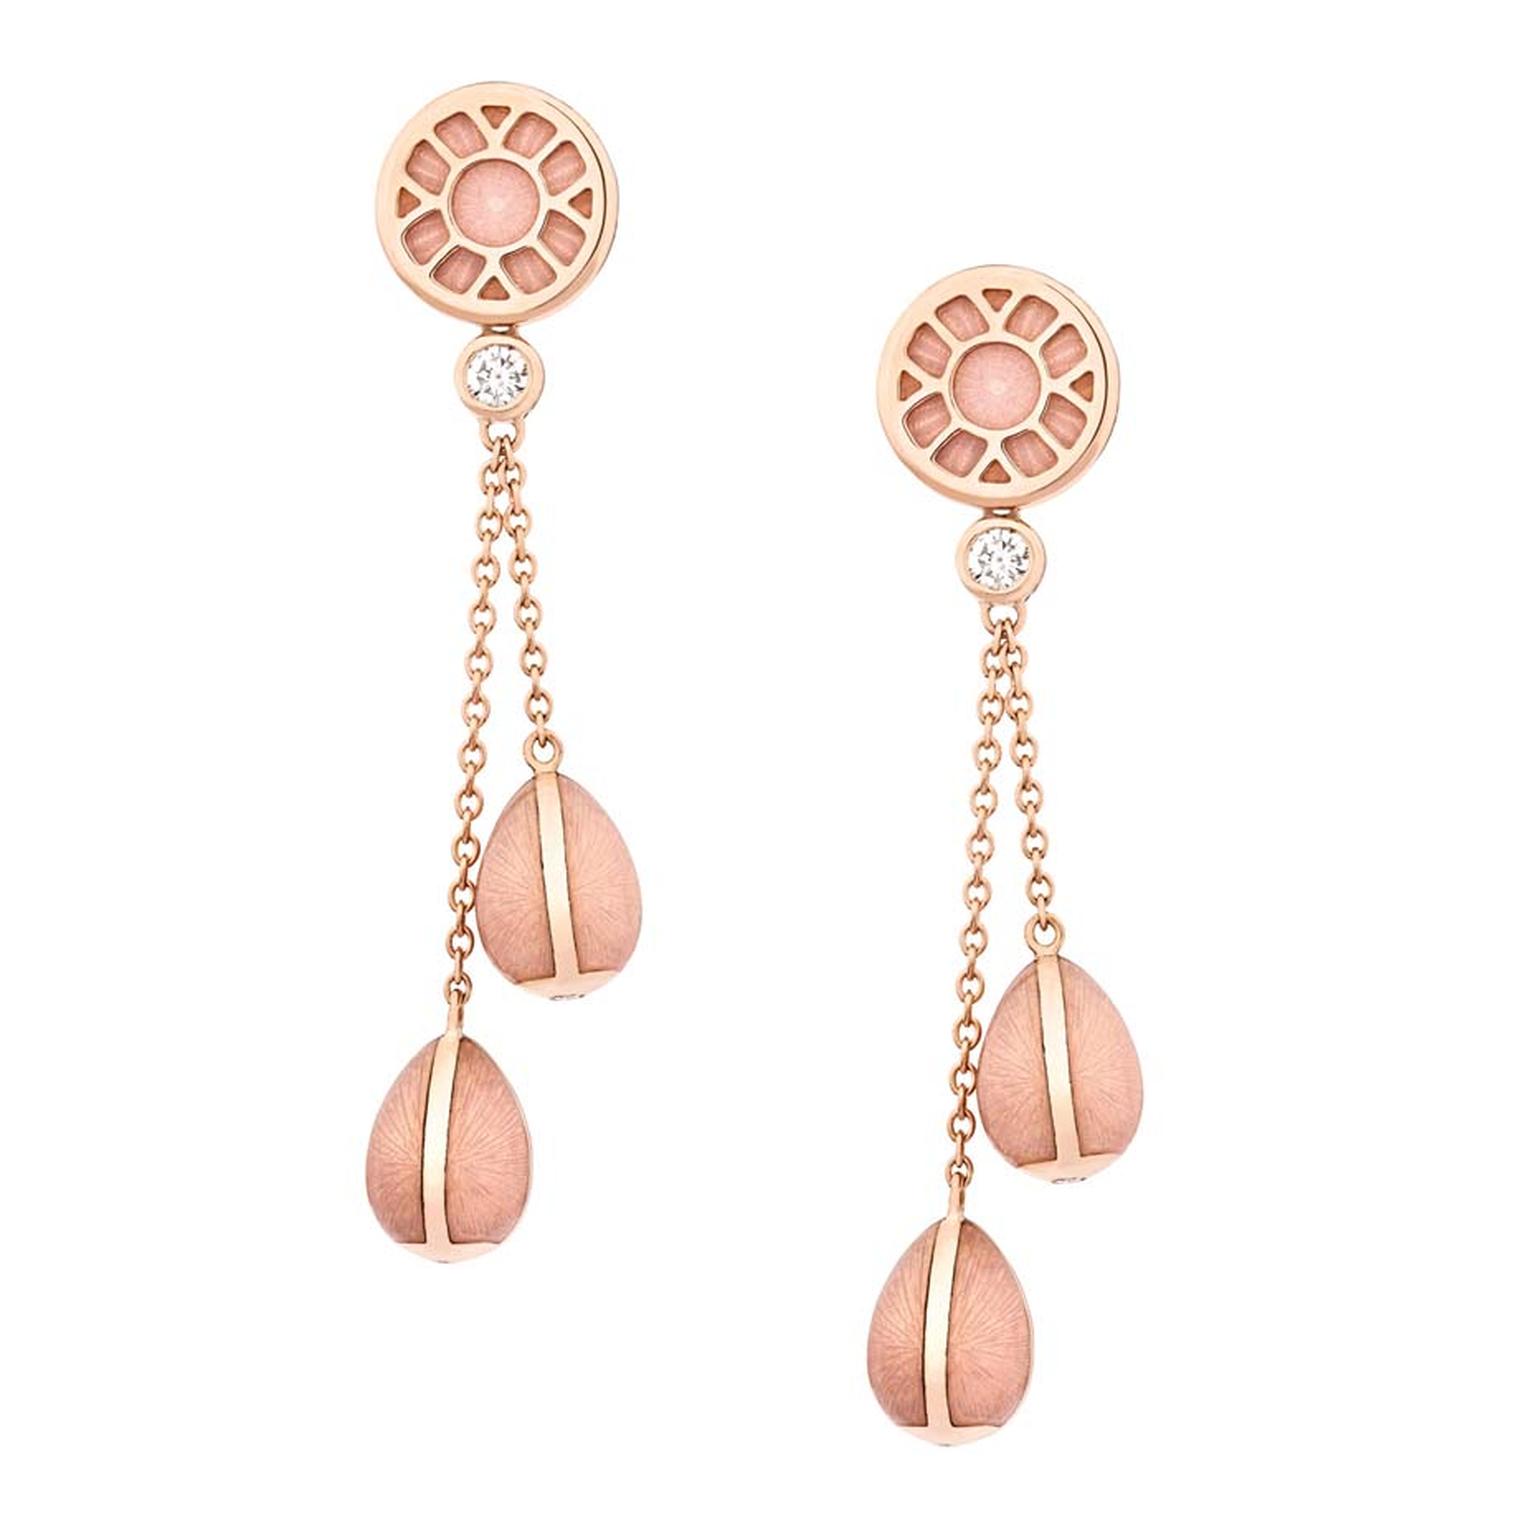 Fabergé draws inspiration from its original high jewellery masterpieces for its Heritage collection, which includes this pair of rose gold drop earrings, featuring a duo of Fabergé eggs on each earring.